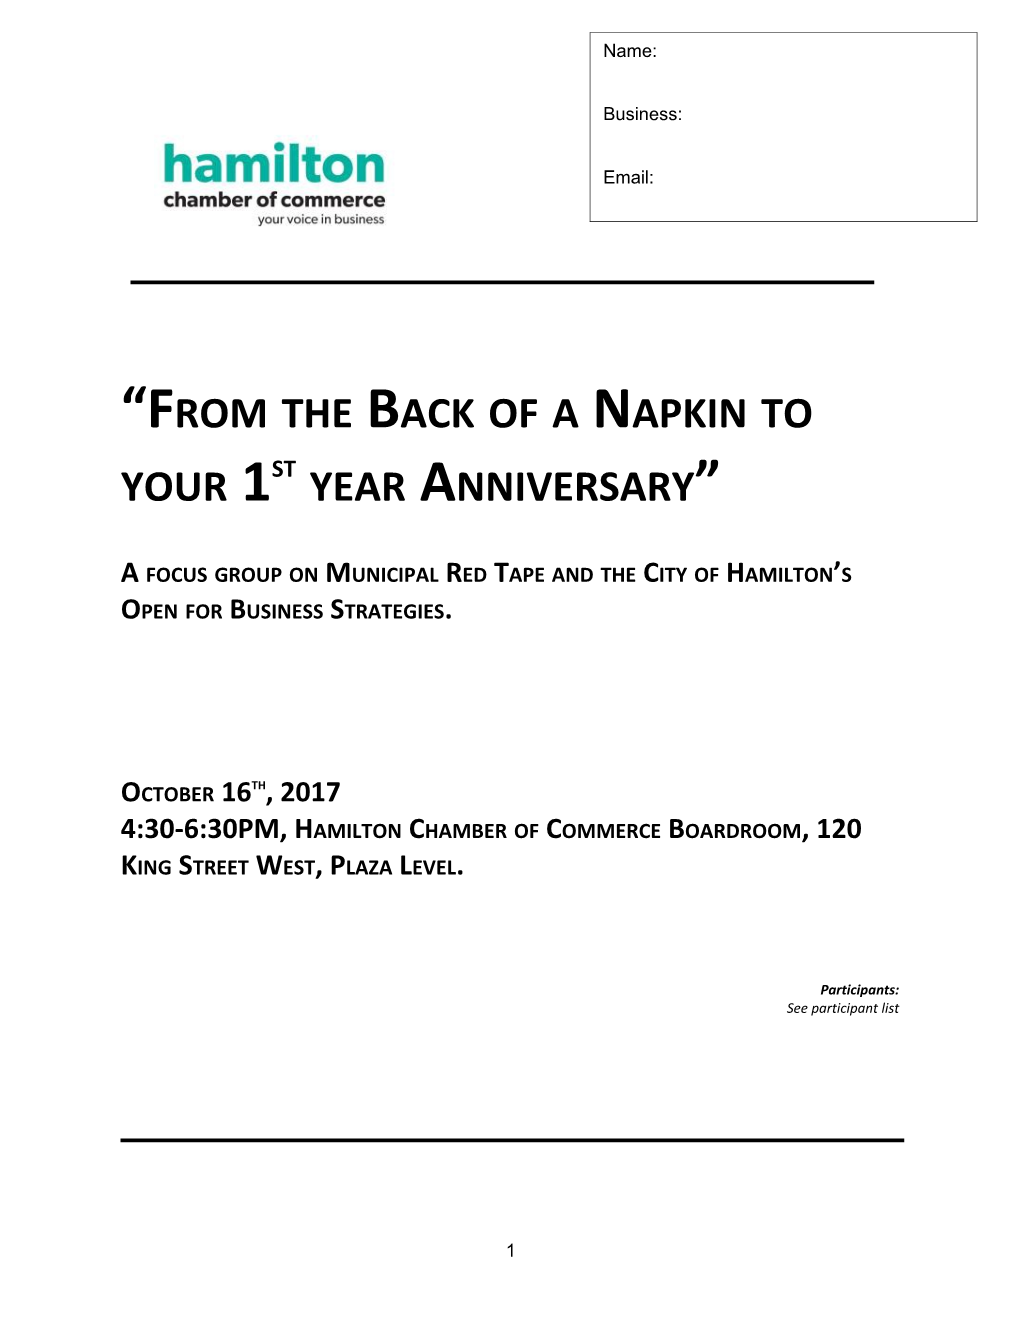 From the Back of a Napkin to Your 1St Year Anniversary